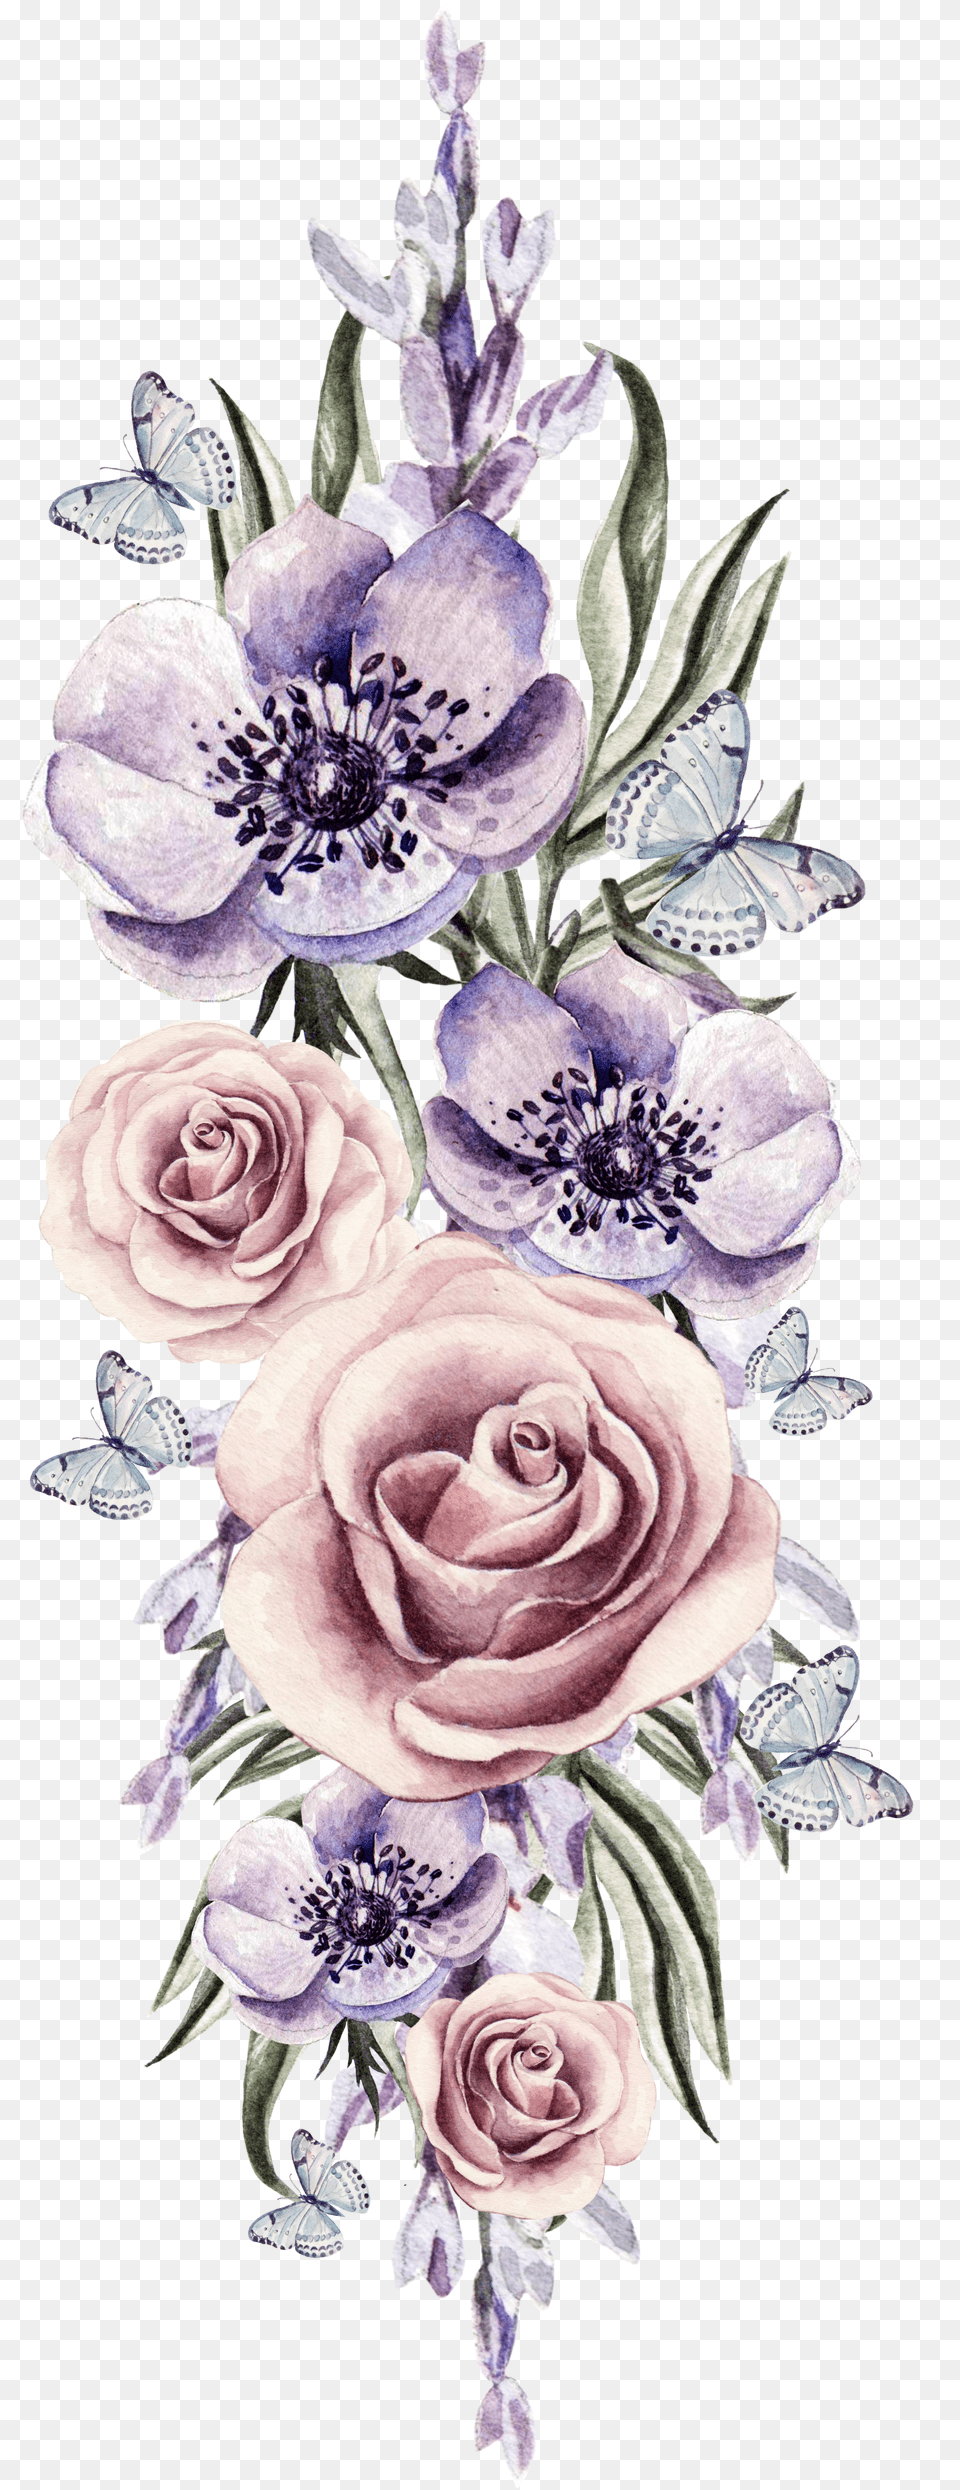 Flower Watercolor Pictures Free Download Free Transparent Background Flowers Png